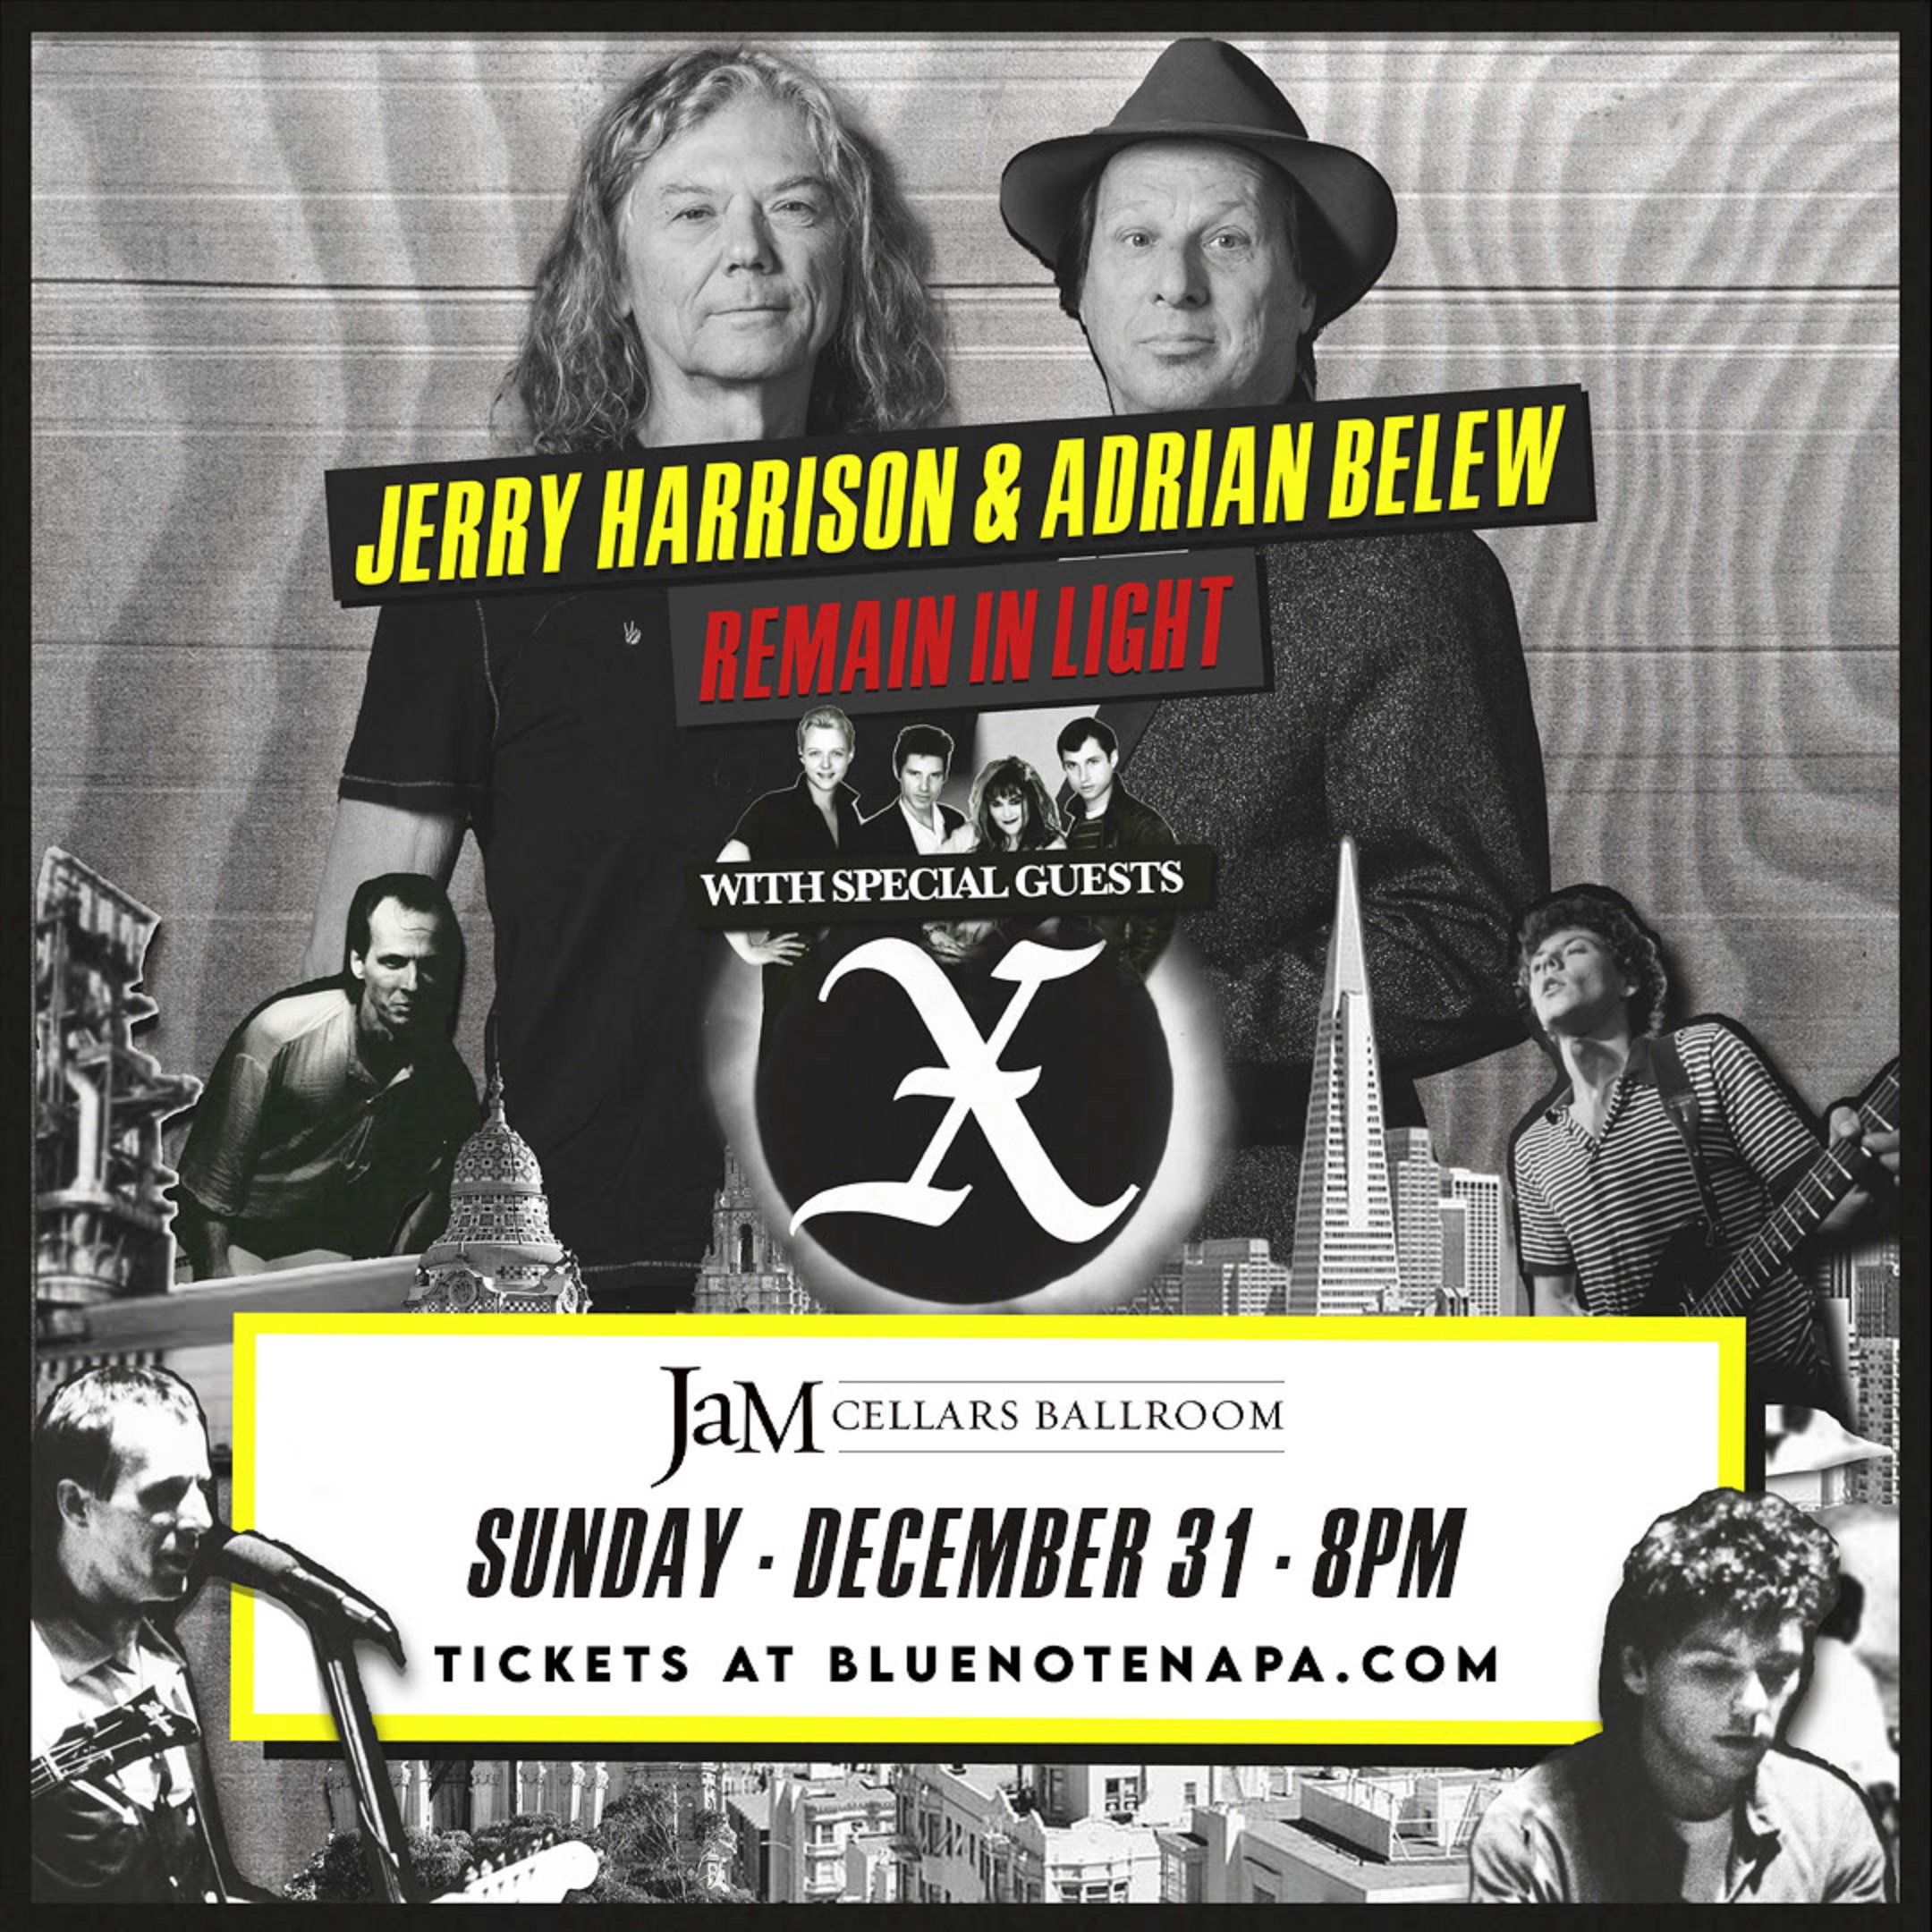 Coming up for NEW YEARS EVE in Napa - Jerry Harrison & Adrian Belew: REMAIN IN LIGHT!